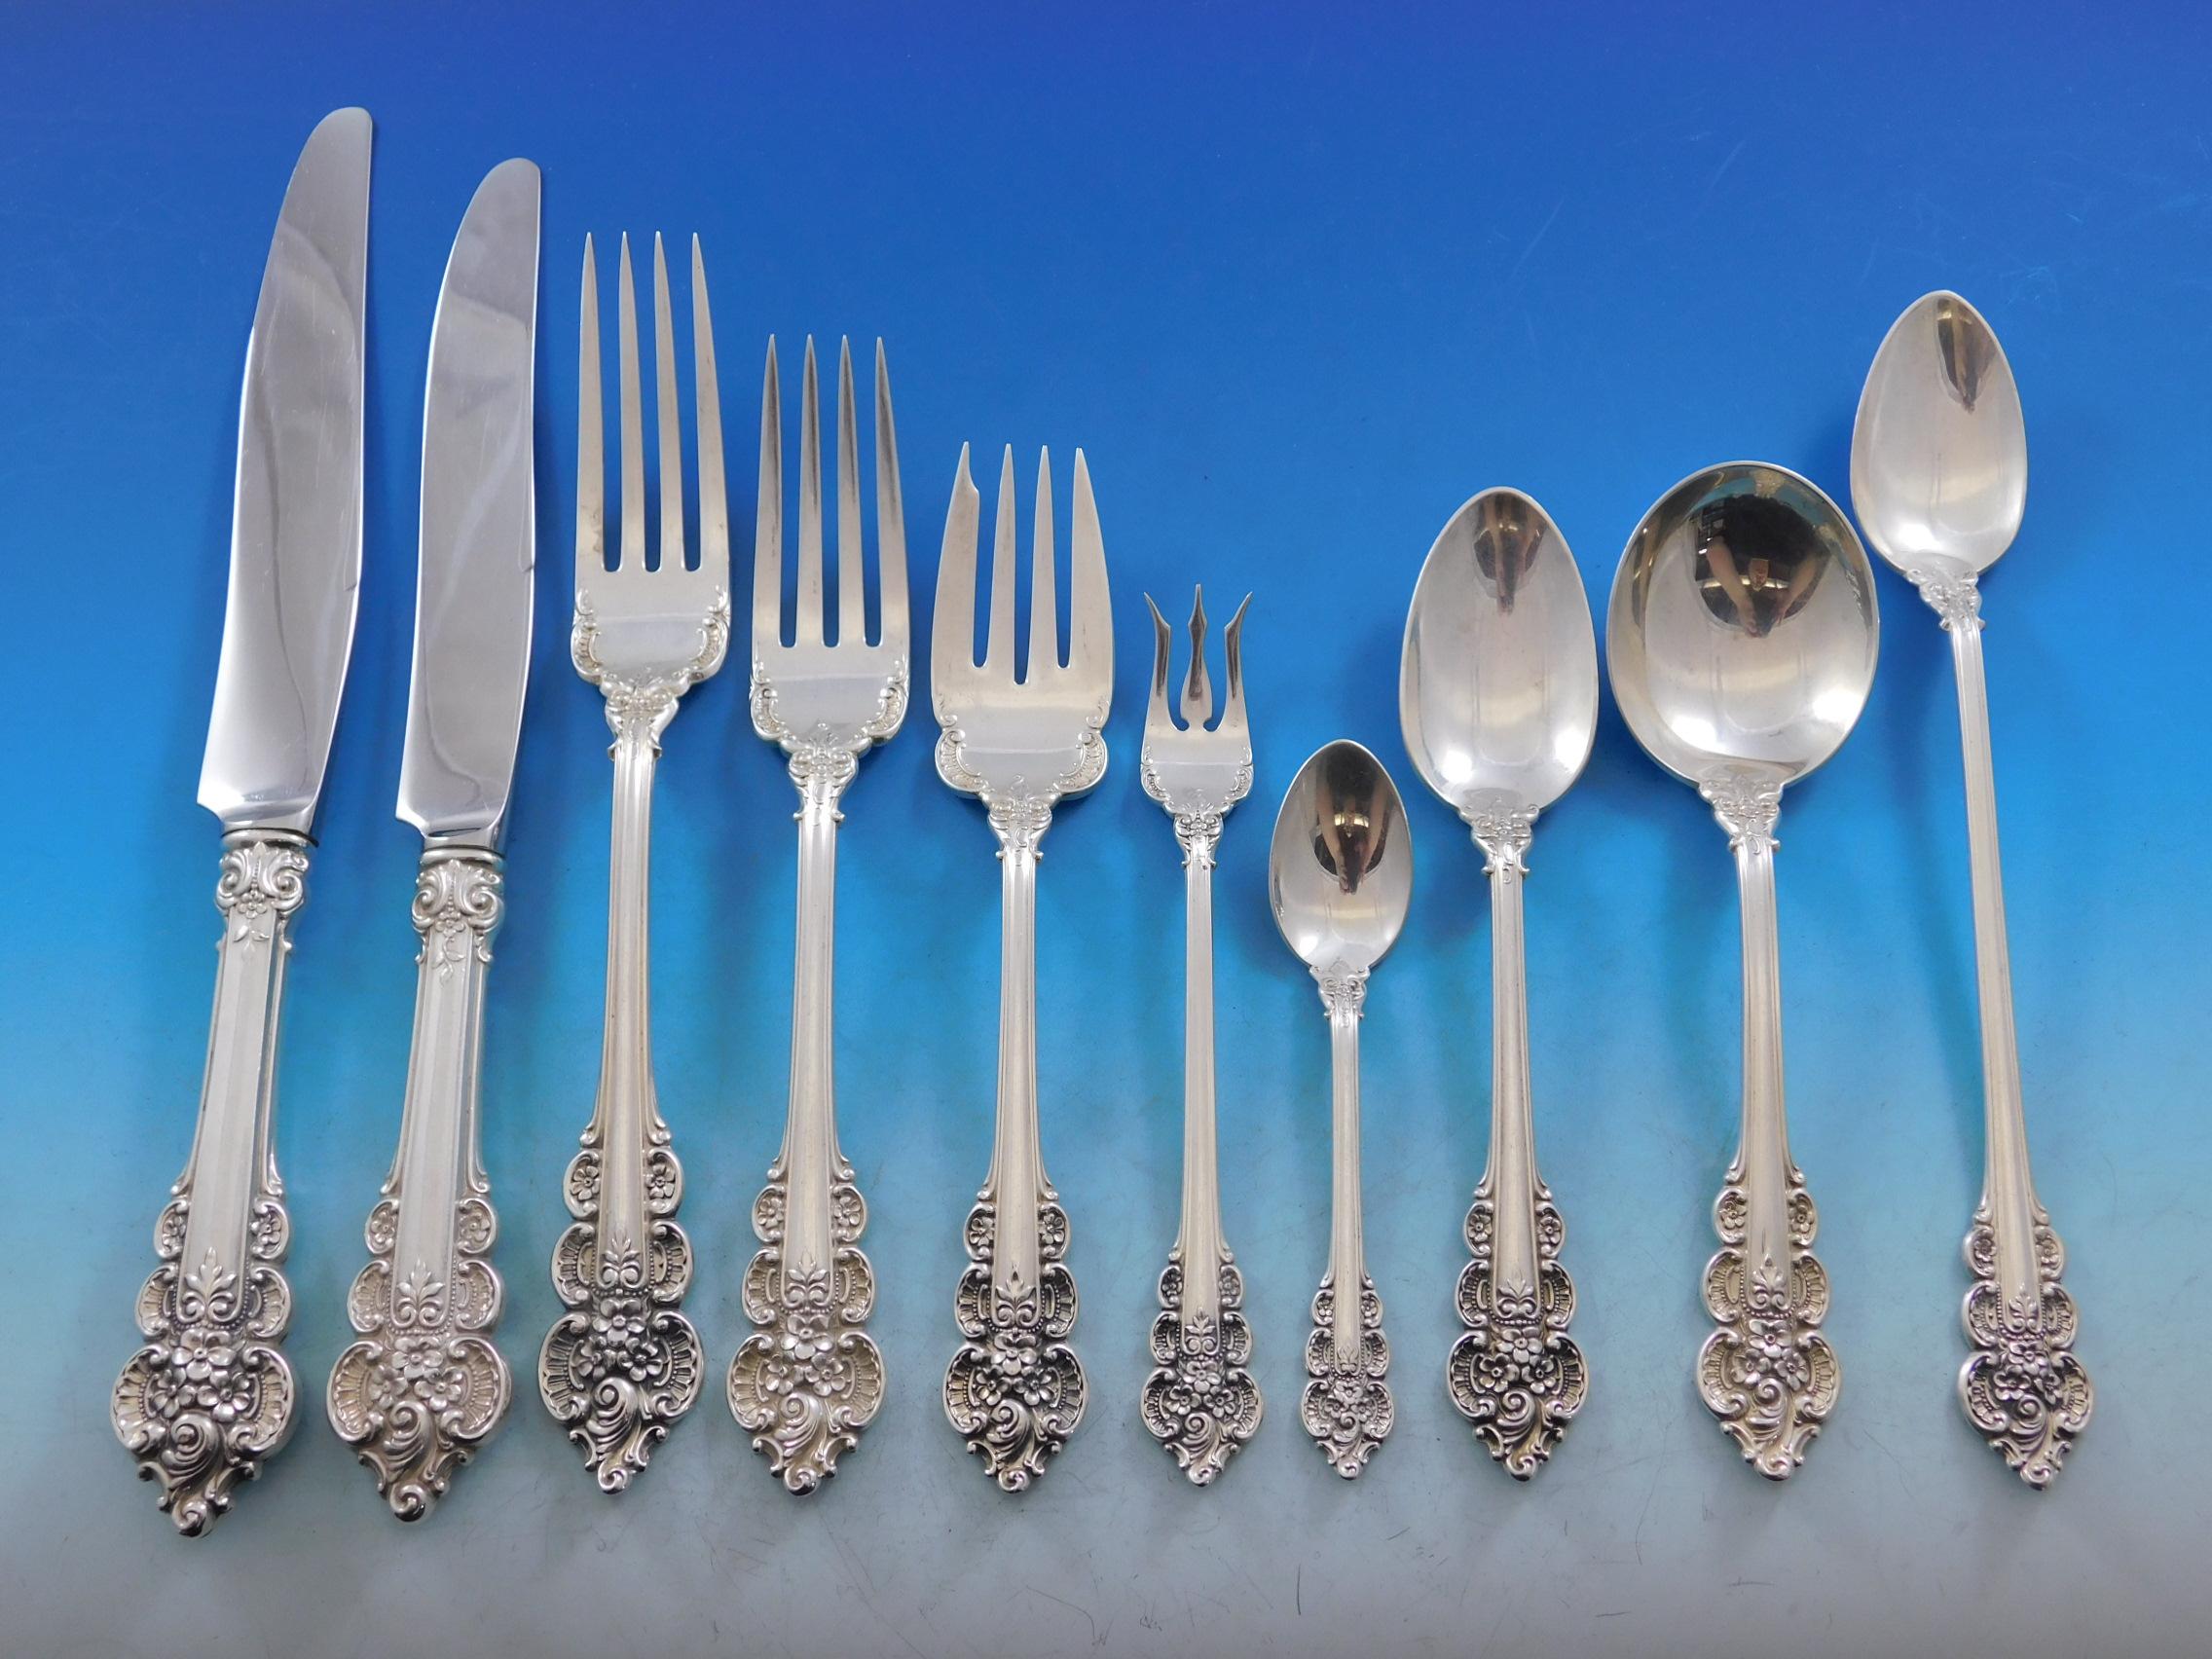 Monumental dinner and regular size Botticelli by Frank Whiting sterling silver flatware set - 158 pieces. This set includes:

12 dinner size knives, 9 3/4